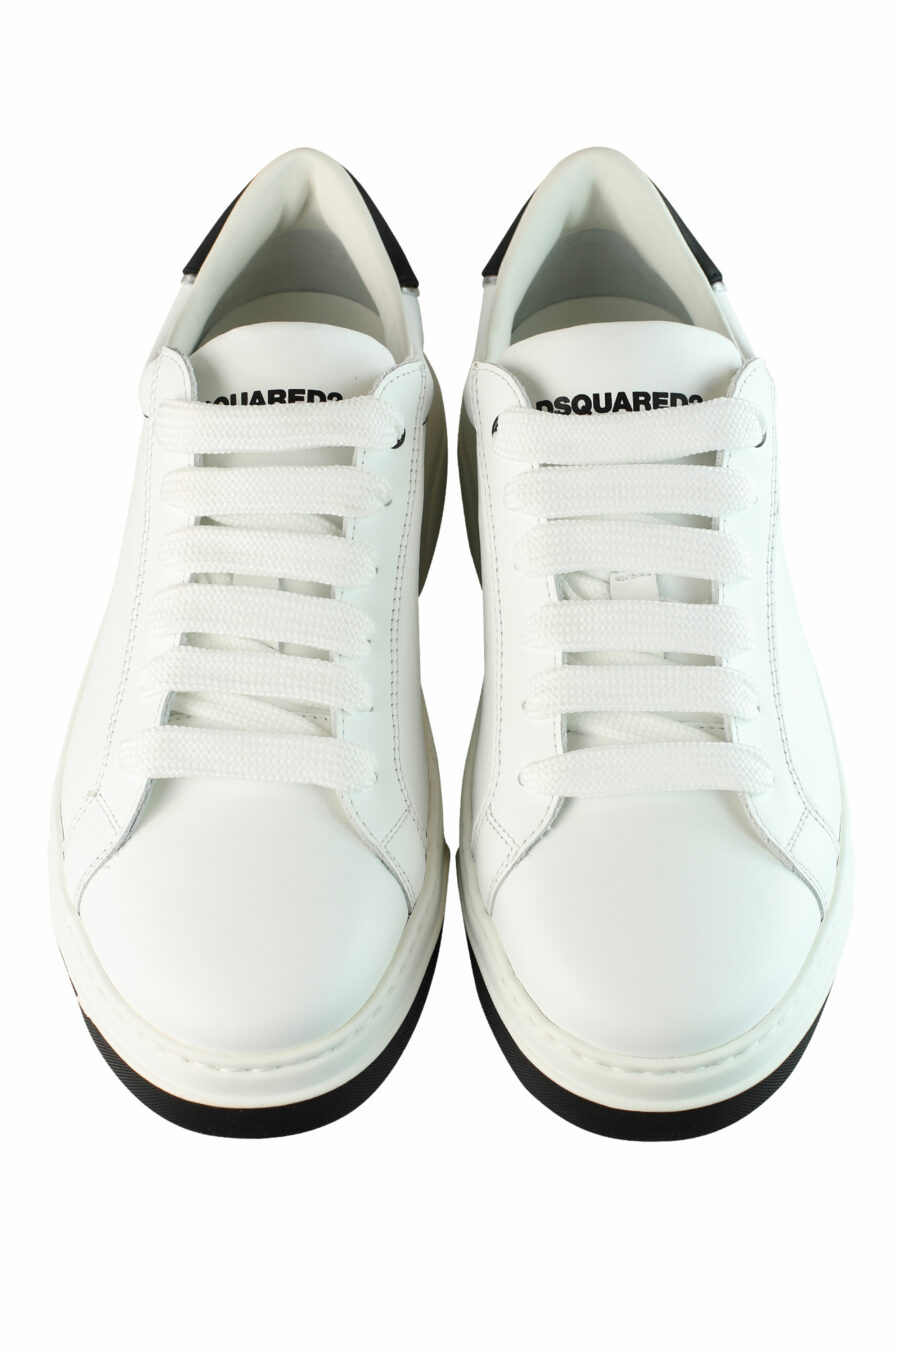 White "bumper" trainers with black details and logo - IMG 1370